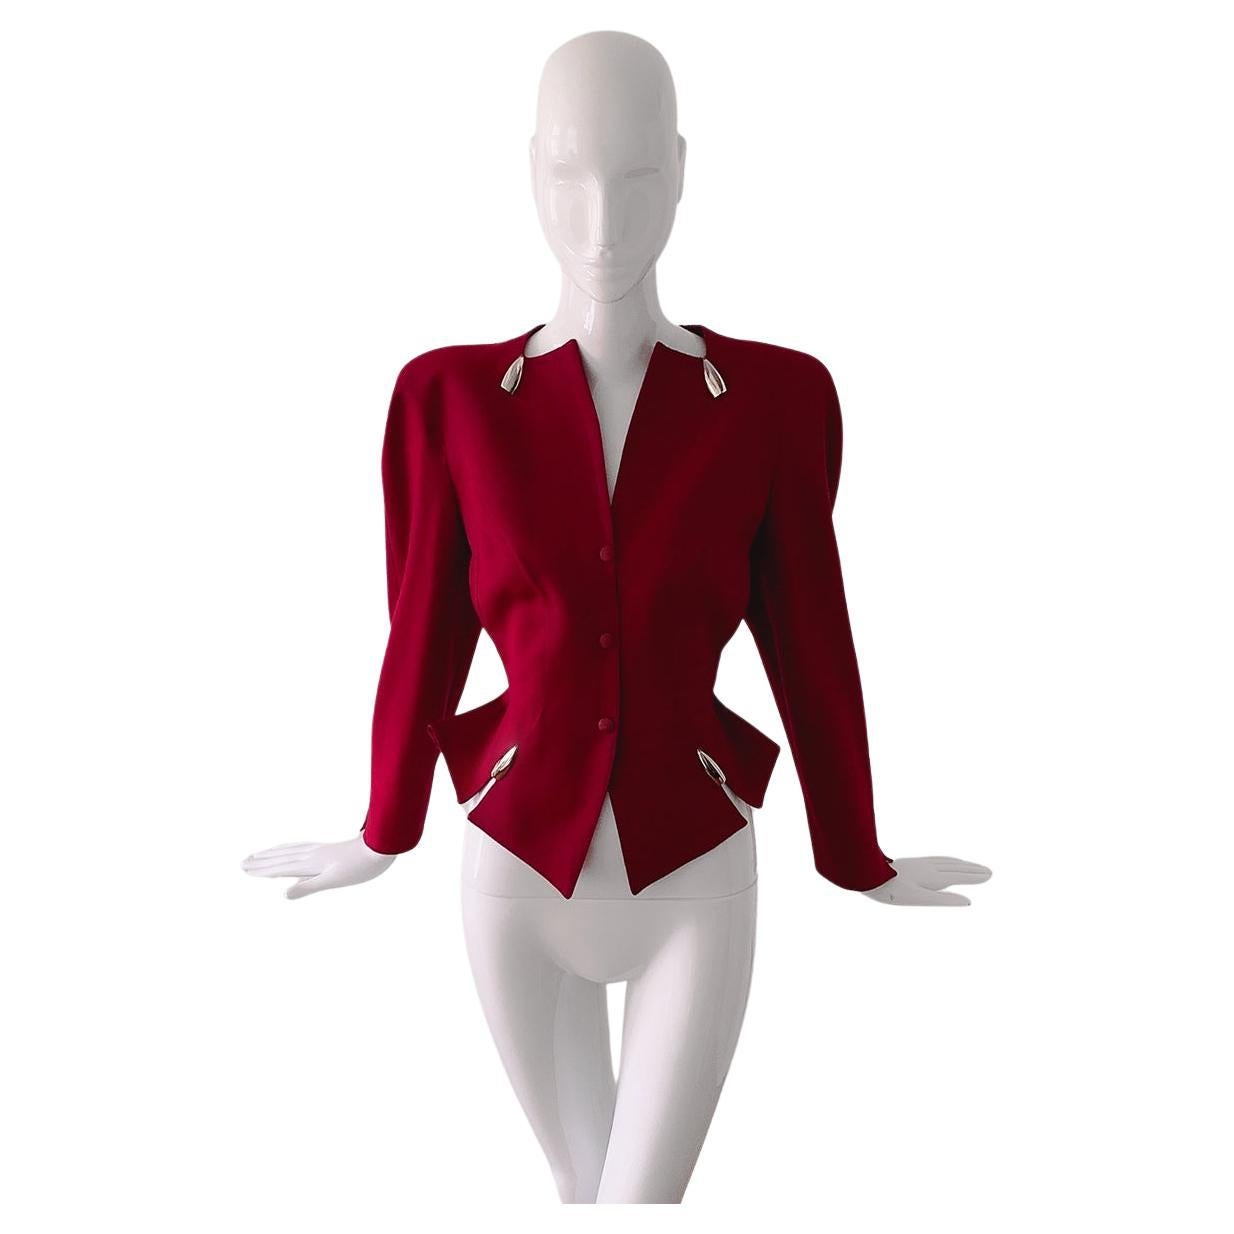 Thierry Mugler Red Silver Bullet Blazer Jacket FW 1989-1990 Dramatic Cutout 80s 